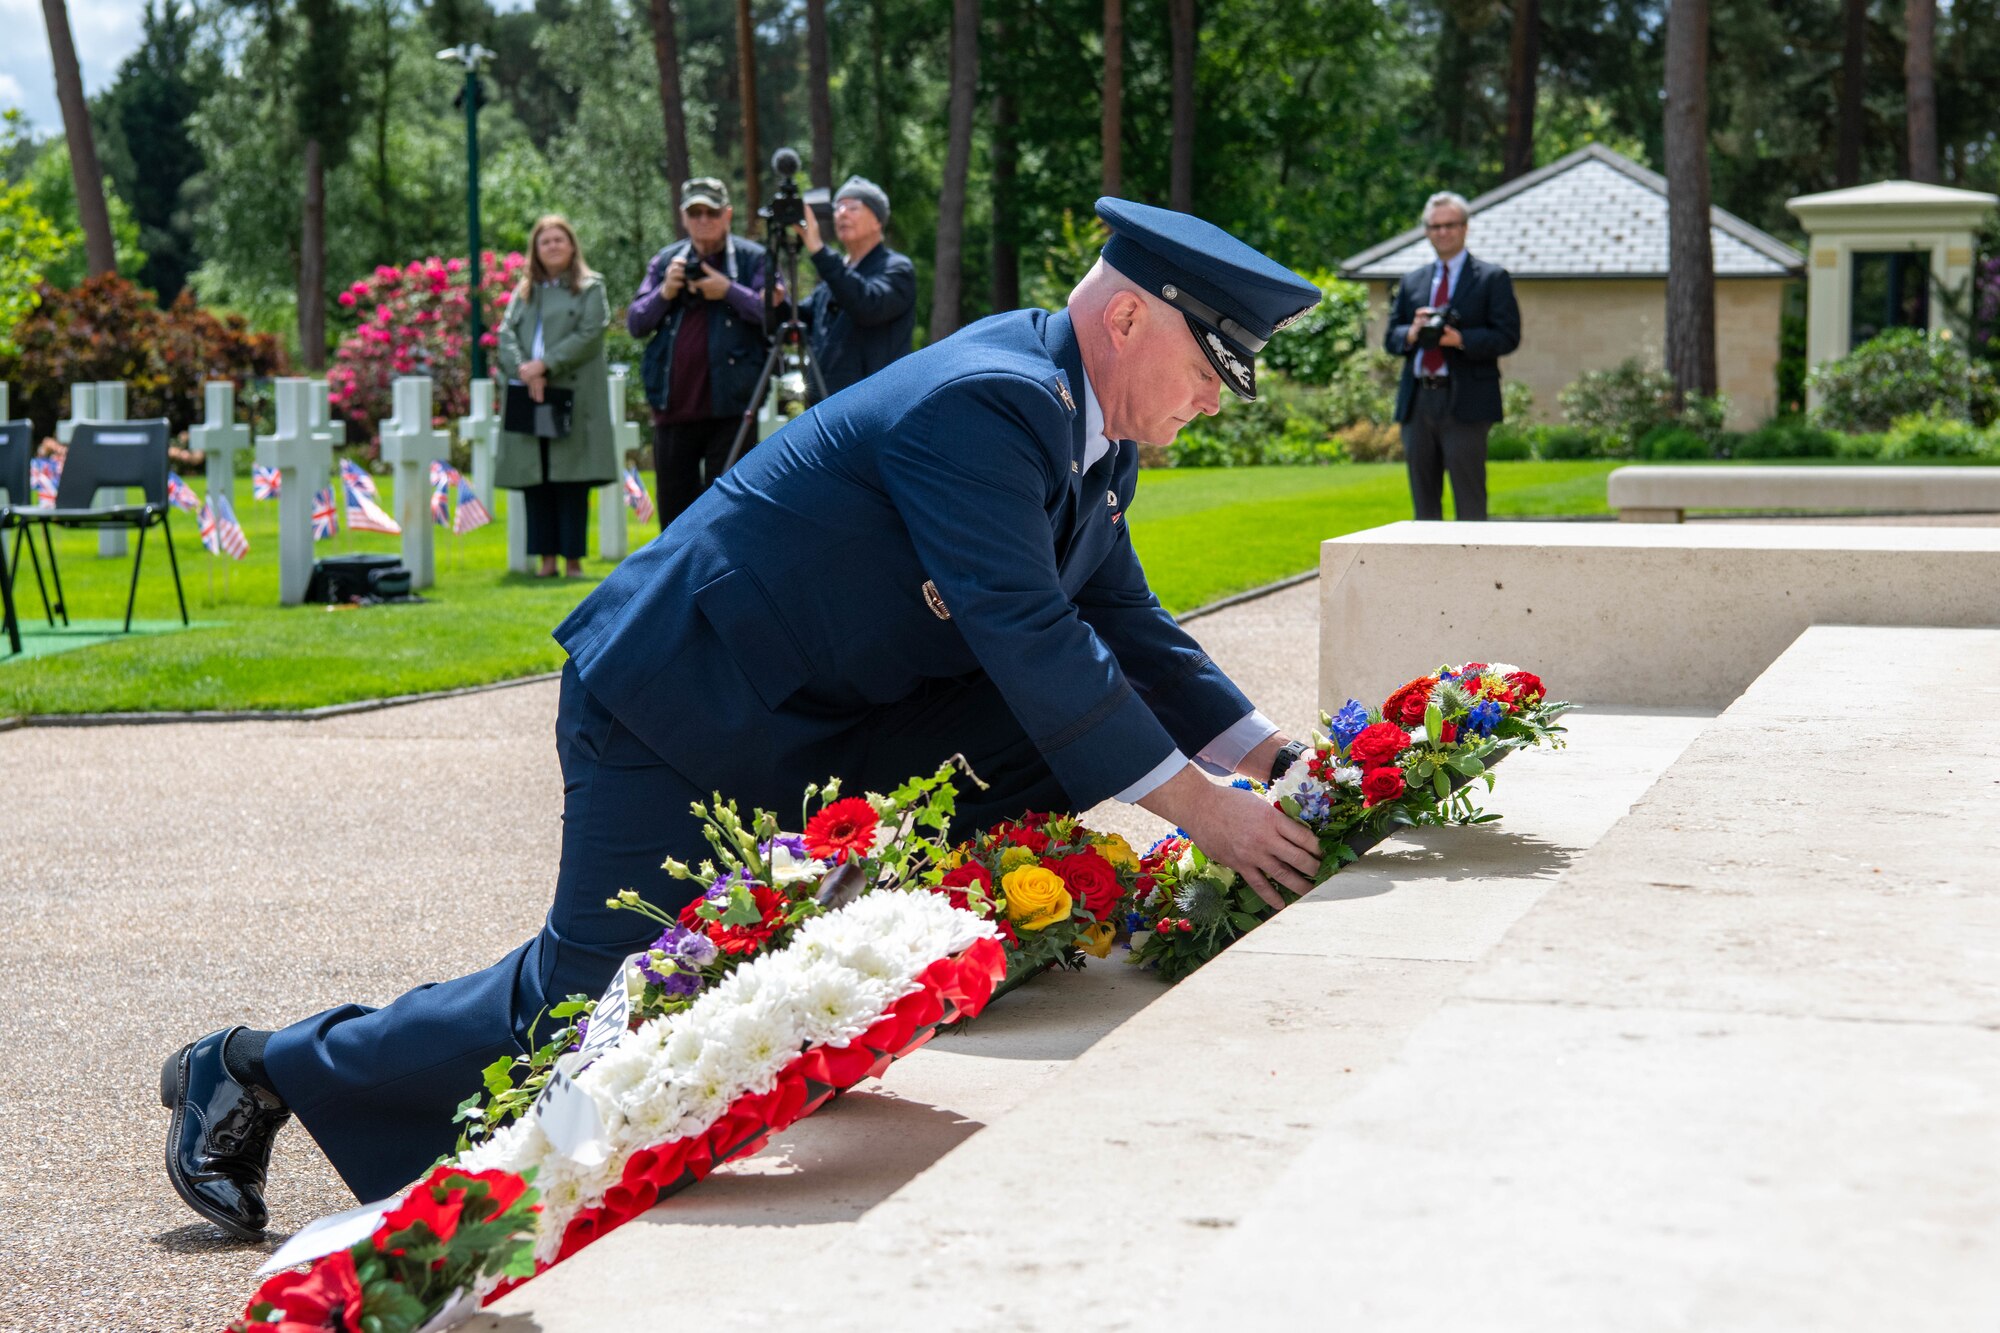 An Airman lays a wreath during a Memorial Day ceremony